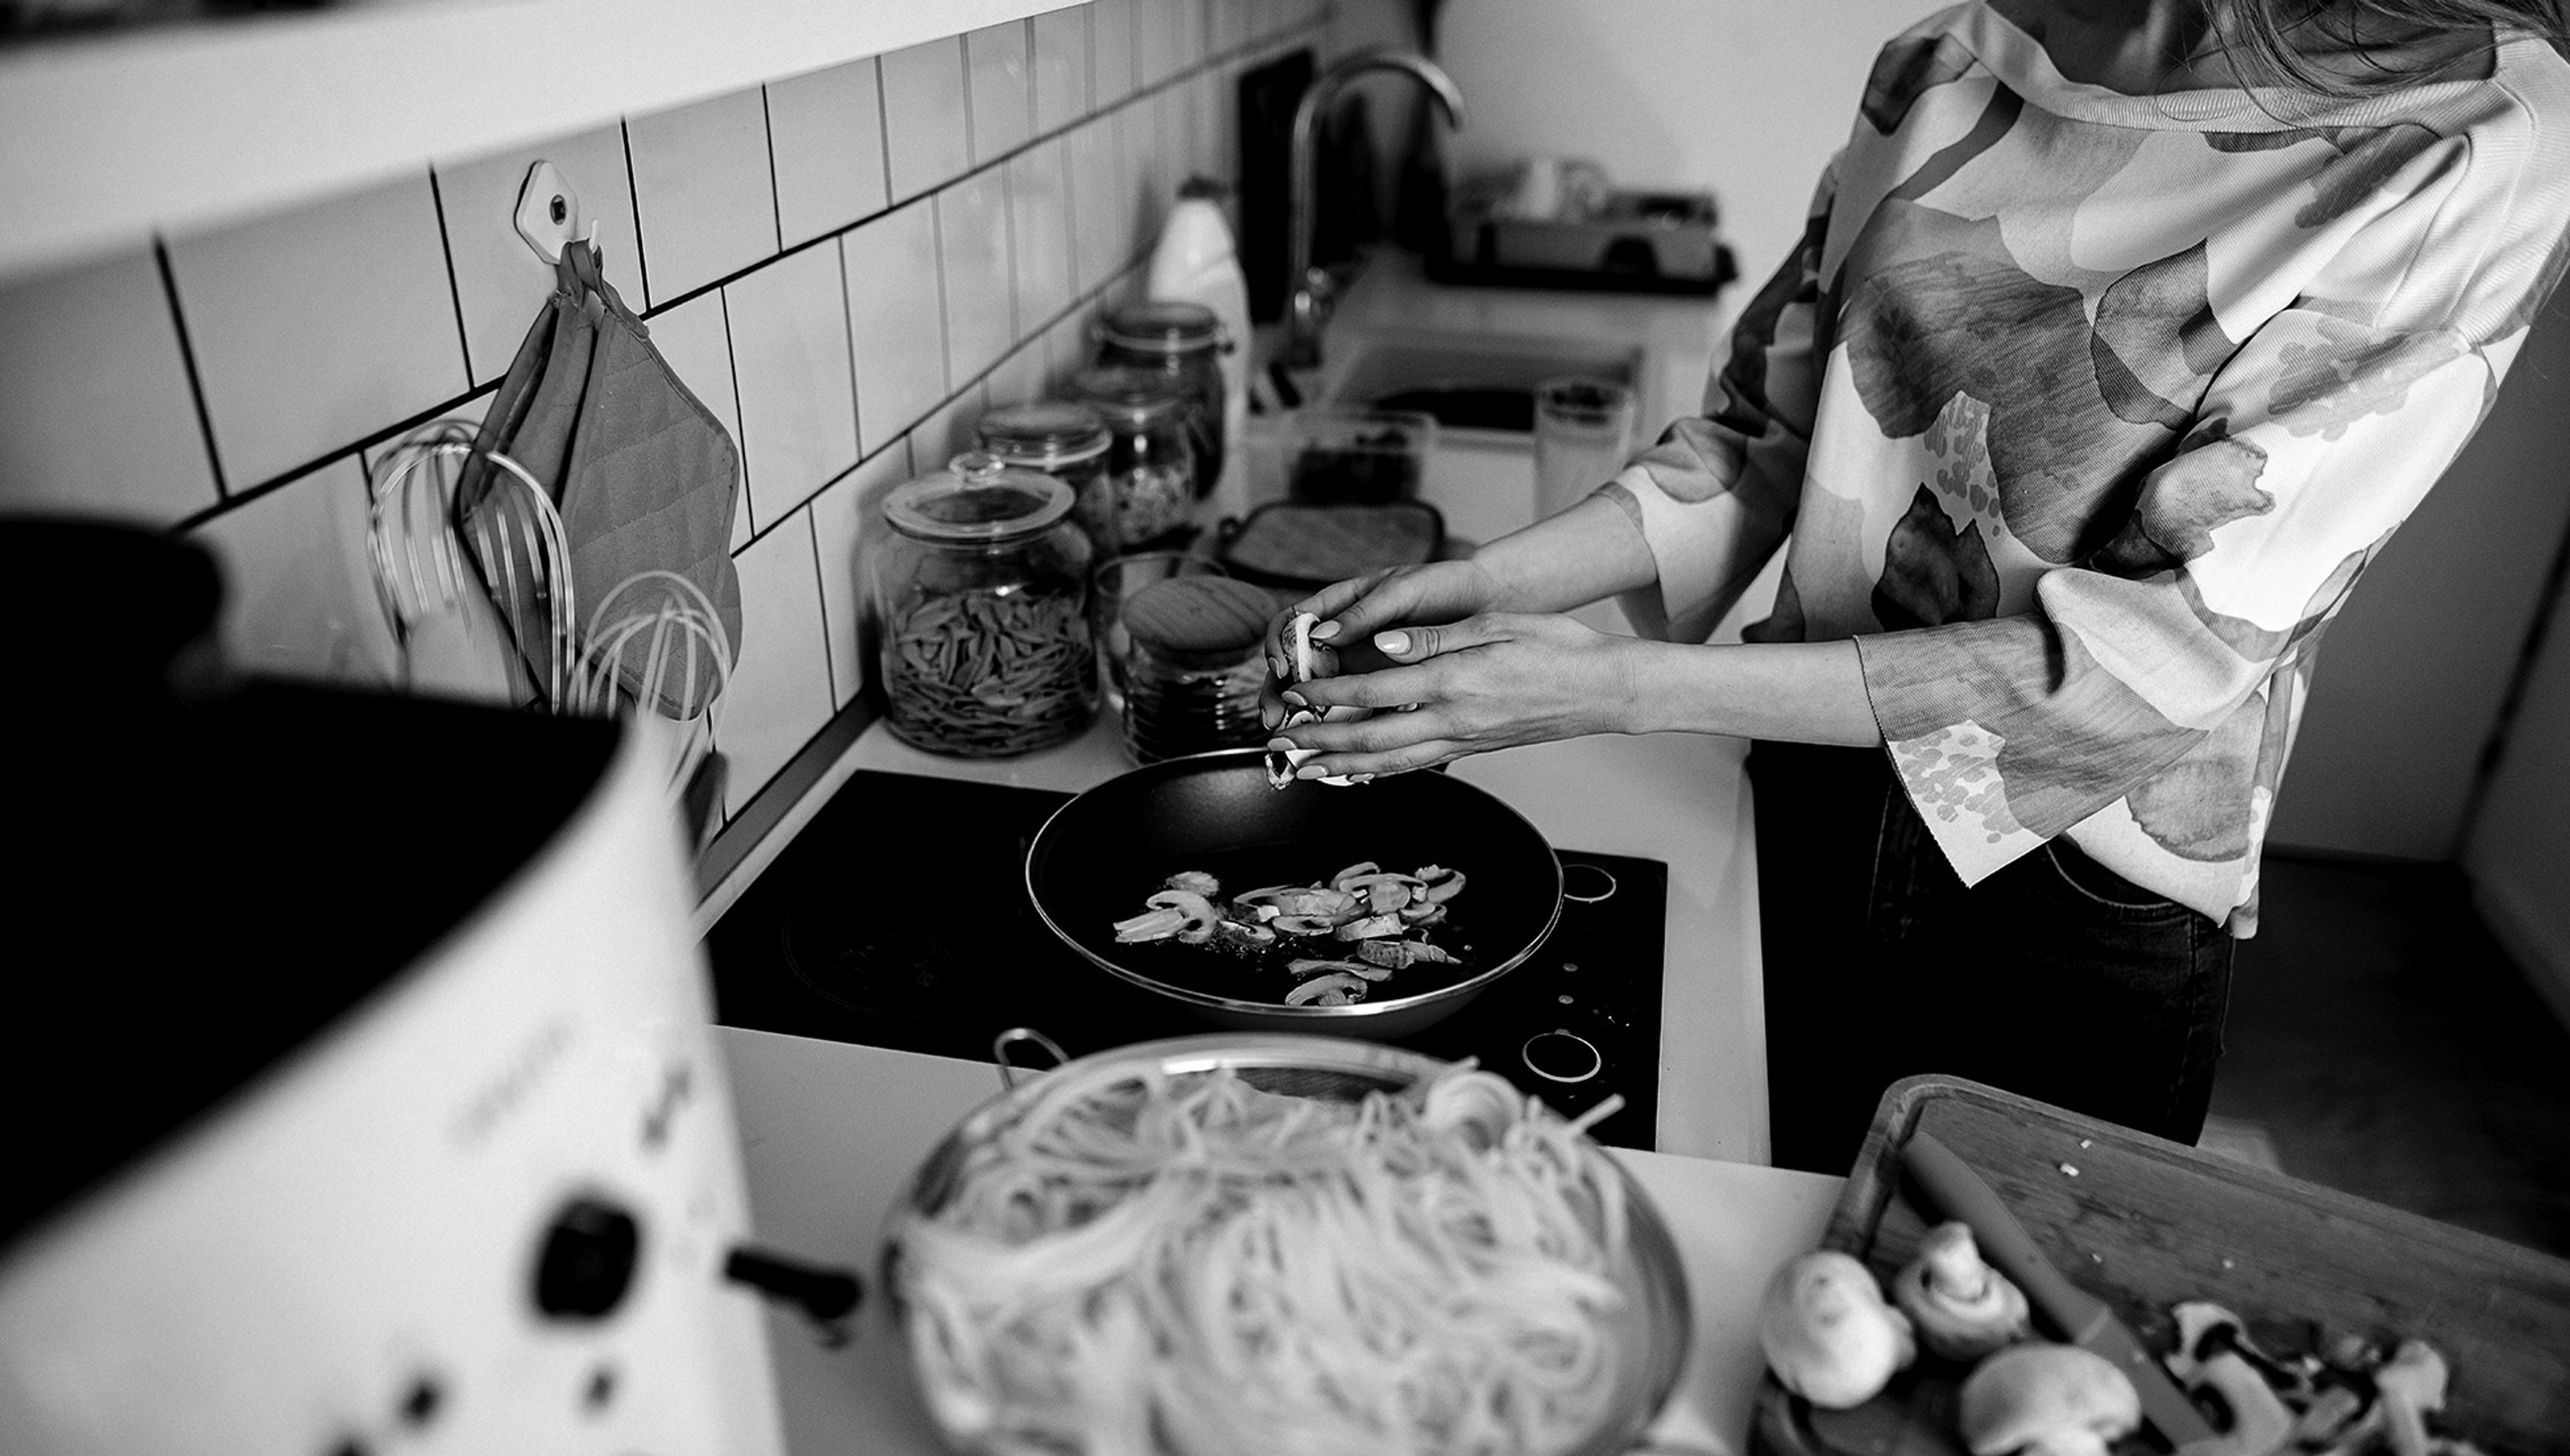 A person cooks mushrooms in a pan on a stove with pasta in a colander and various ingredients spread on the kitchen counter.